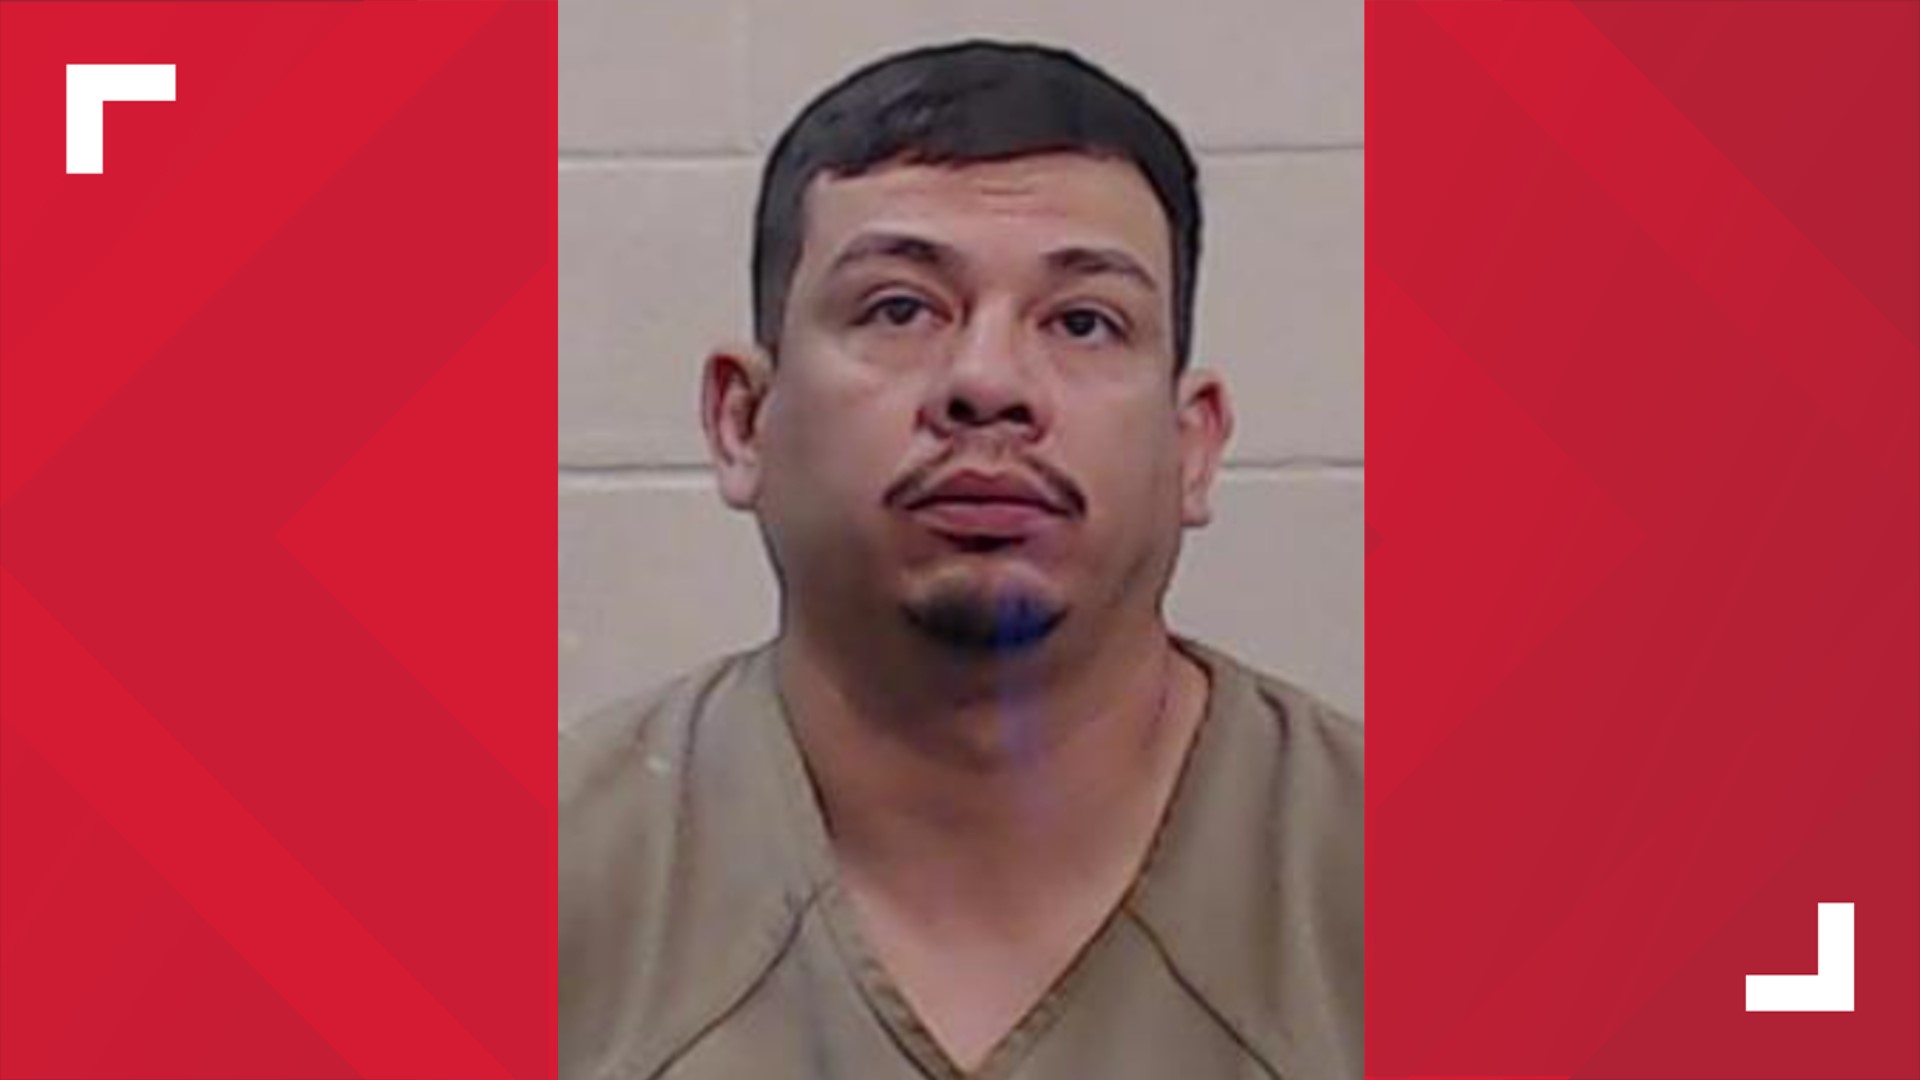 Jose Ballardo was initially charged with murder for an incident that occurred in November of 2021.